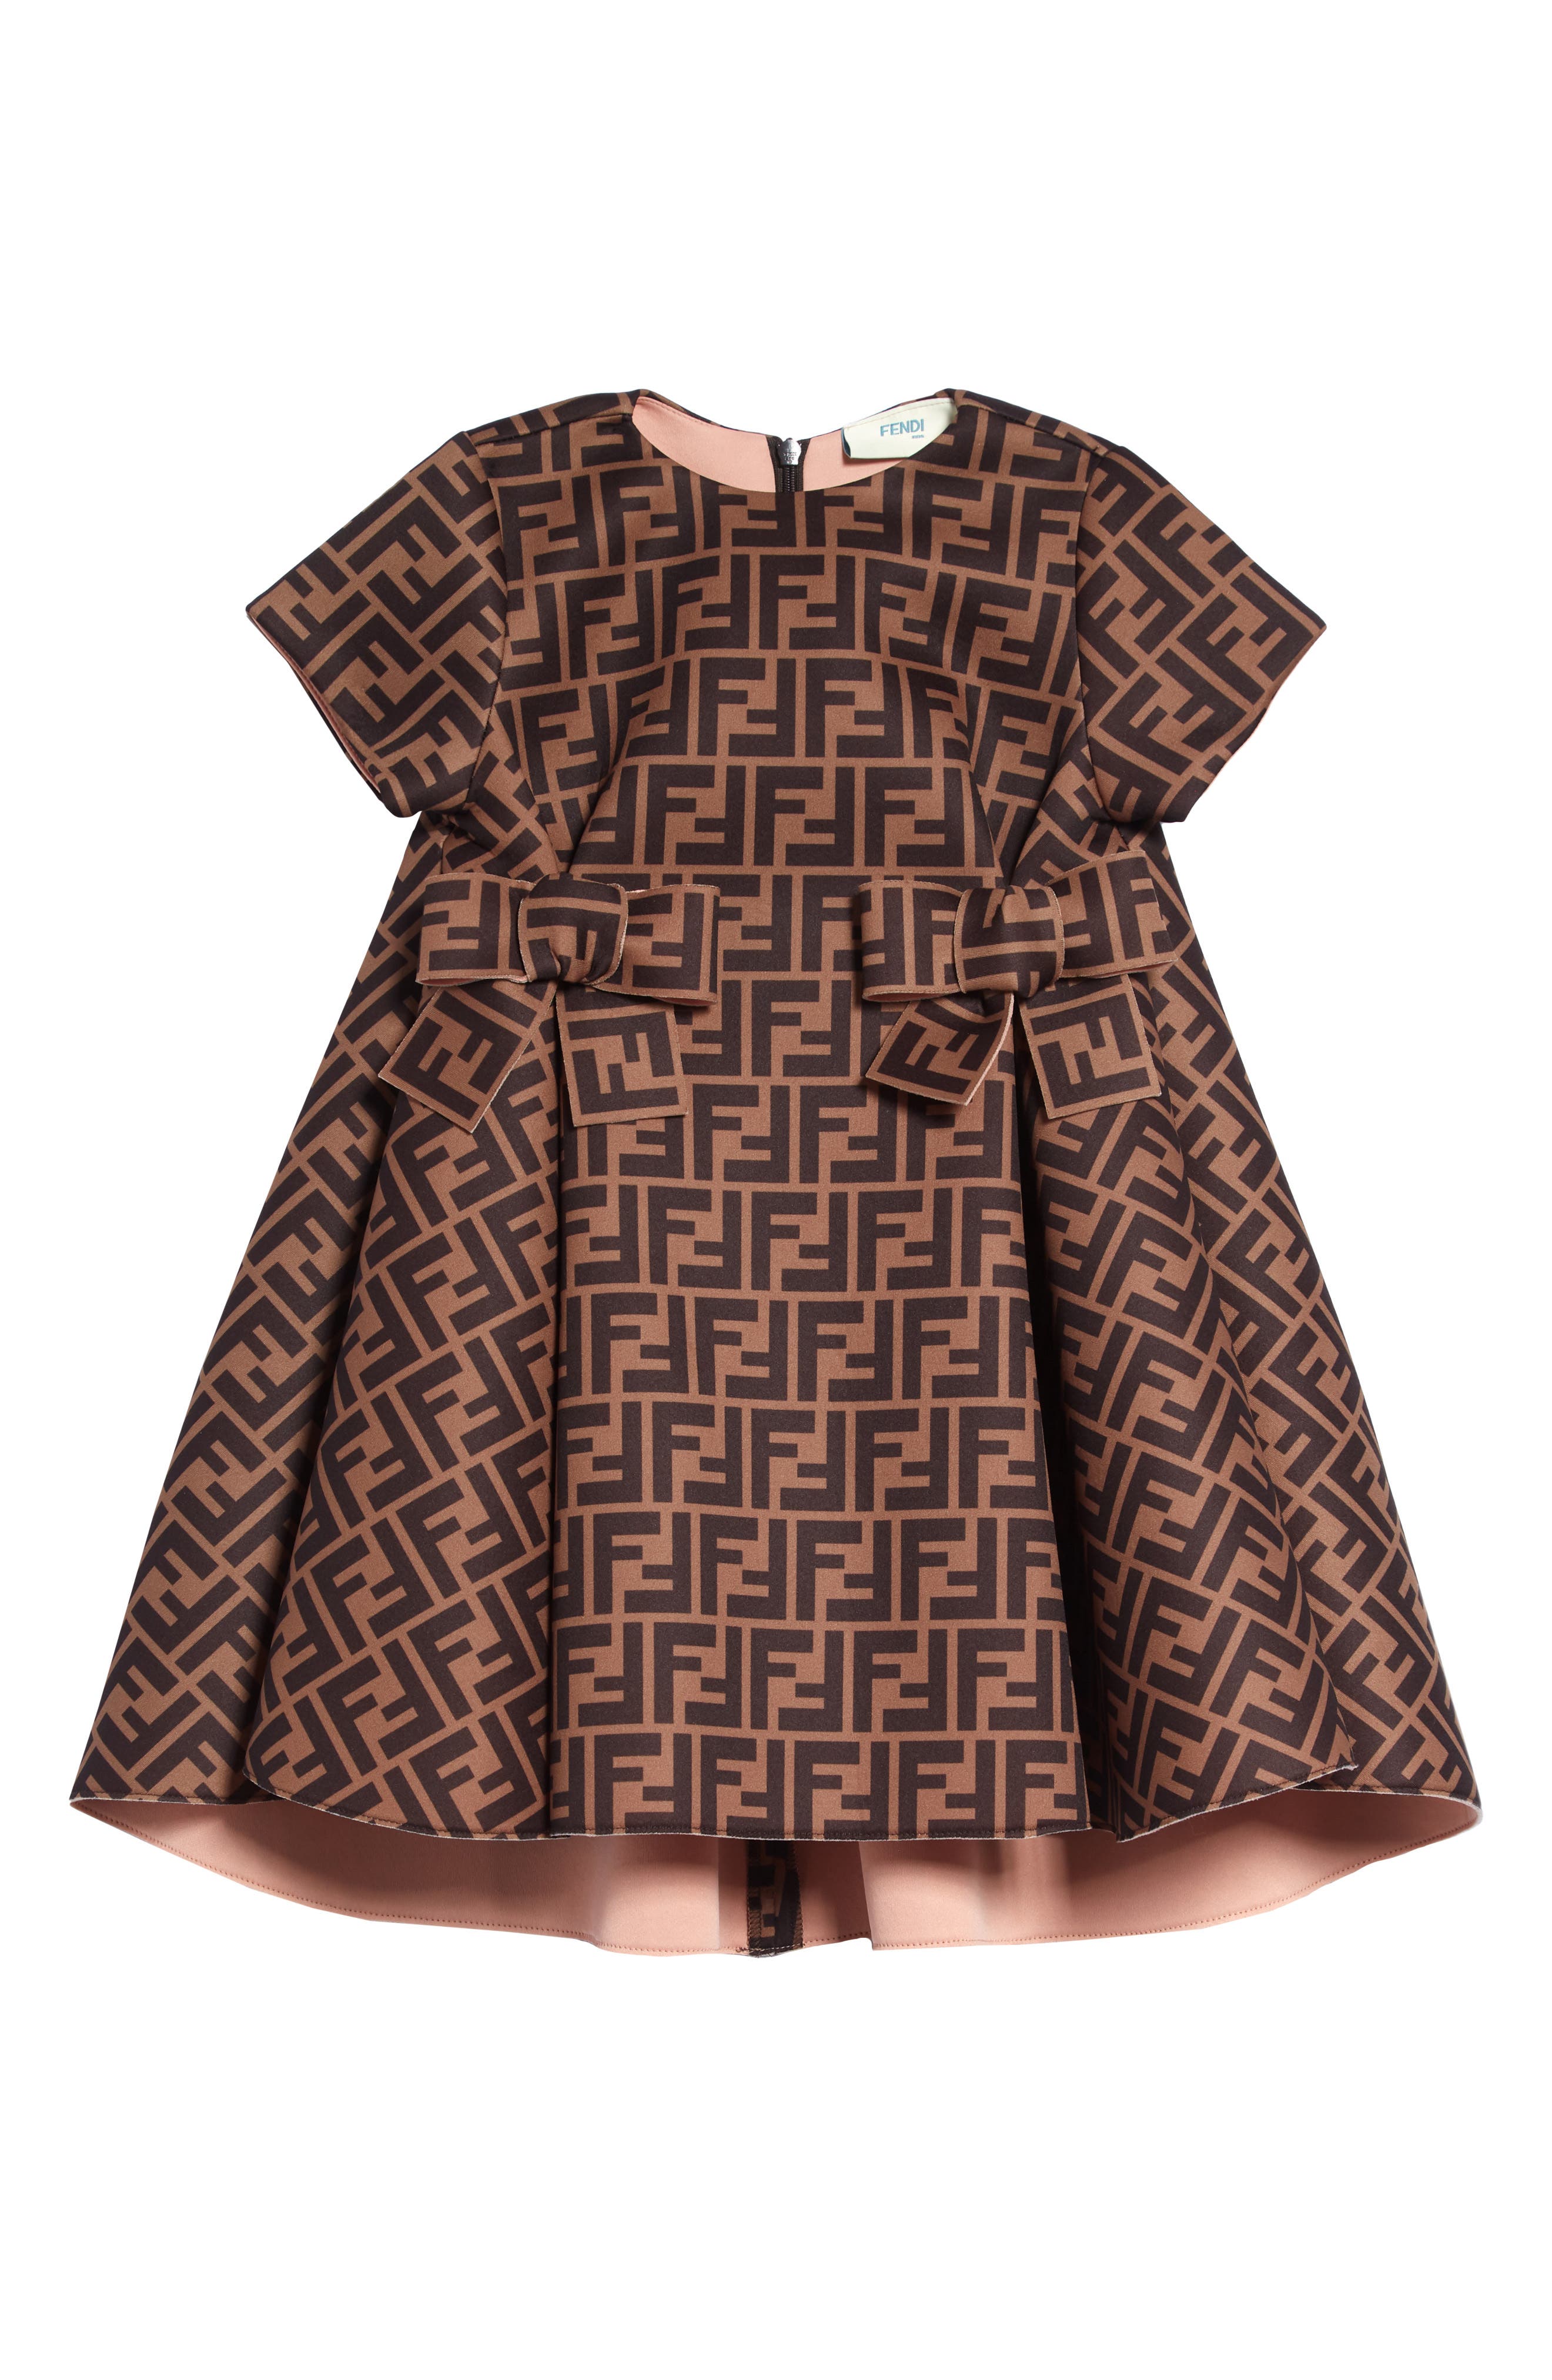 fendi toddler outfit